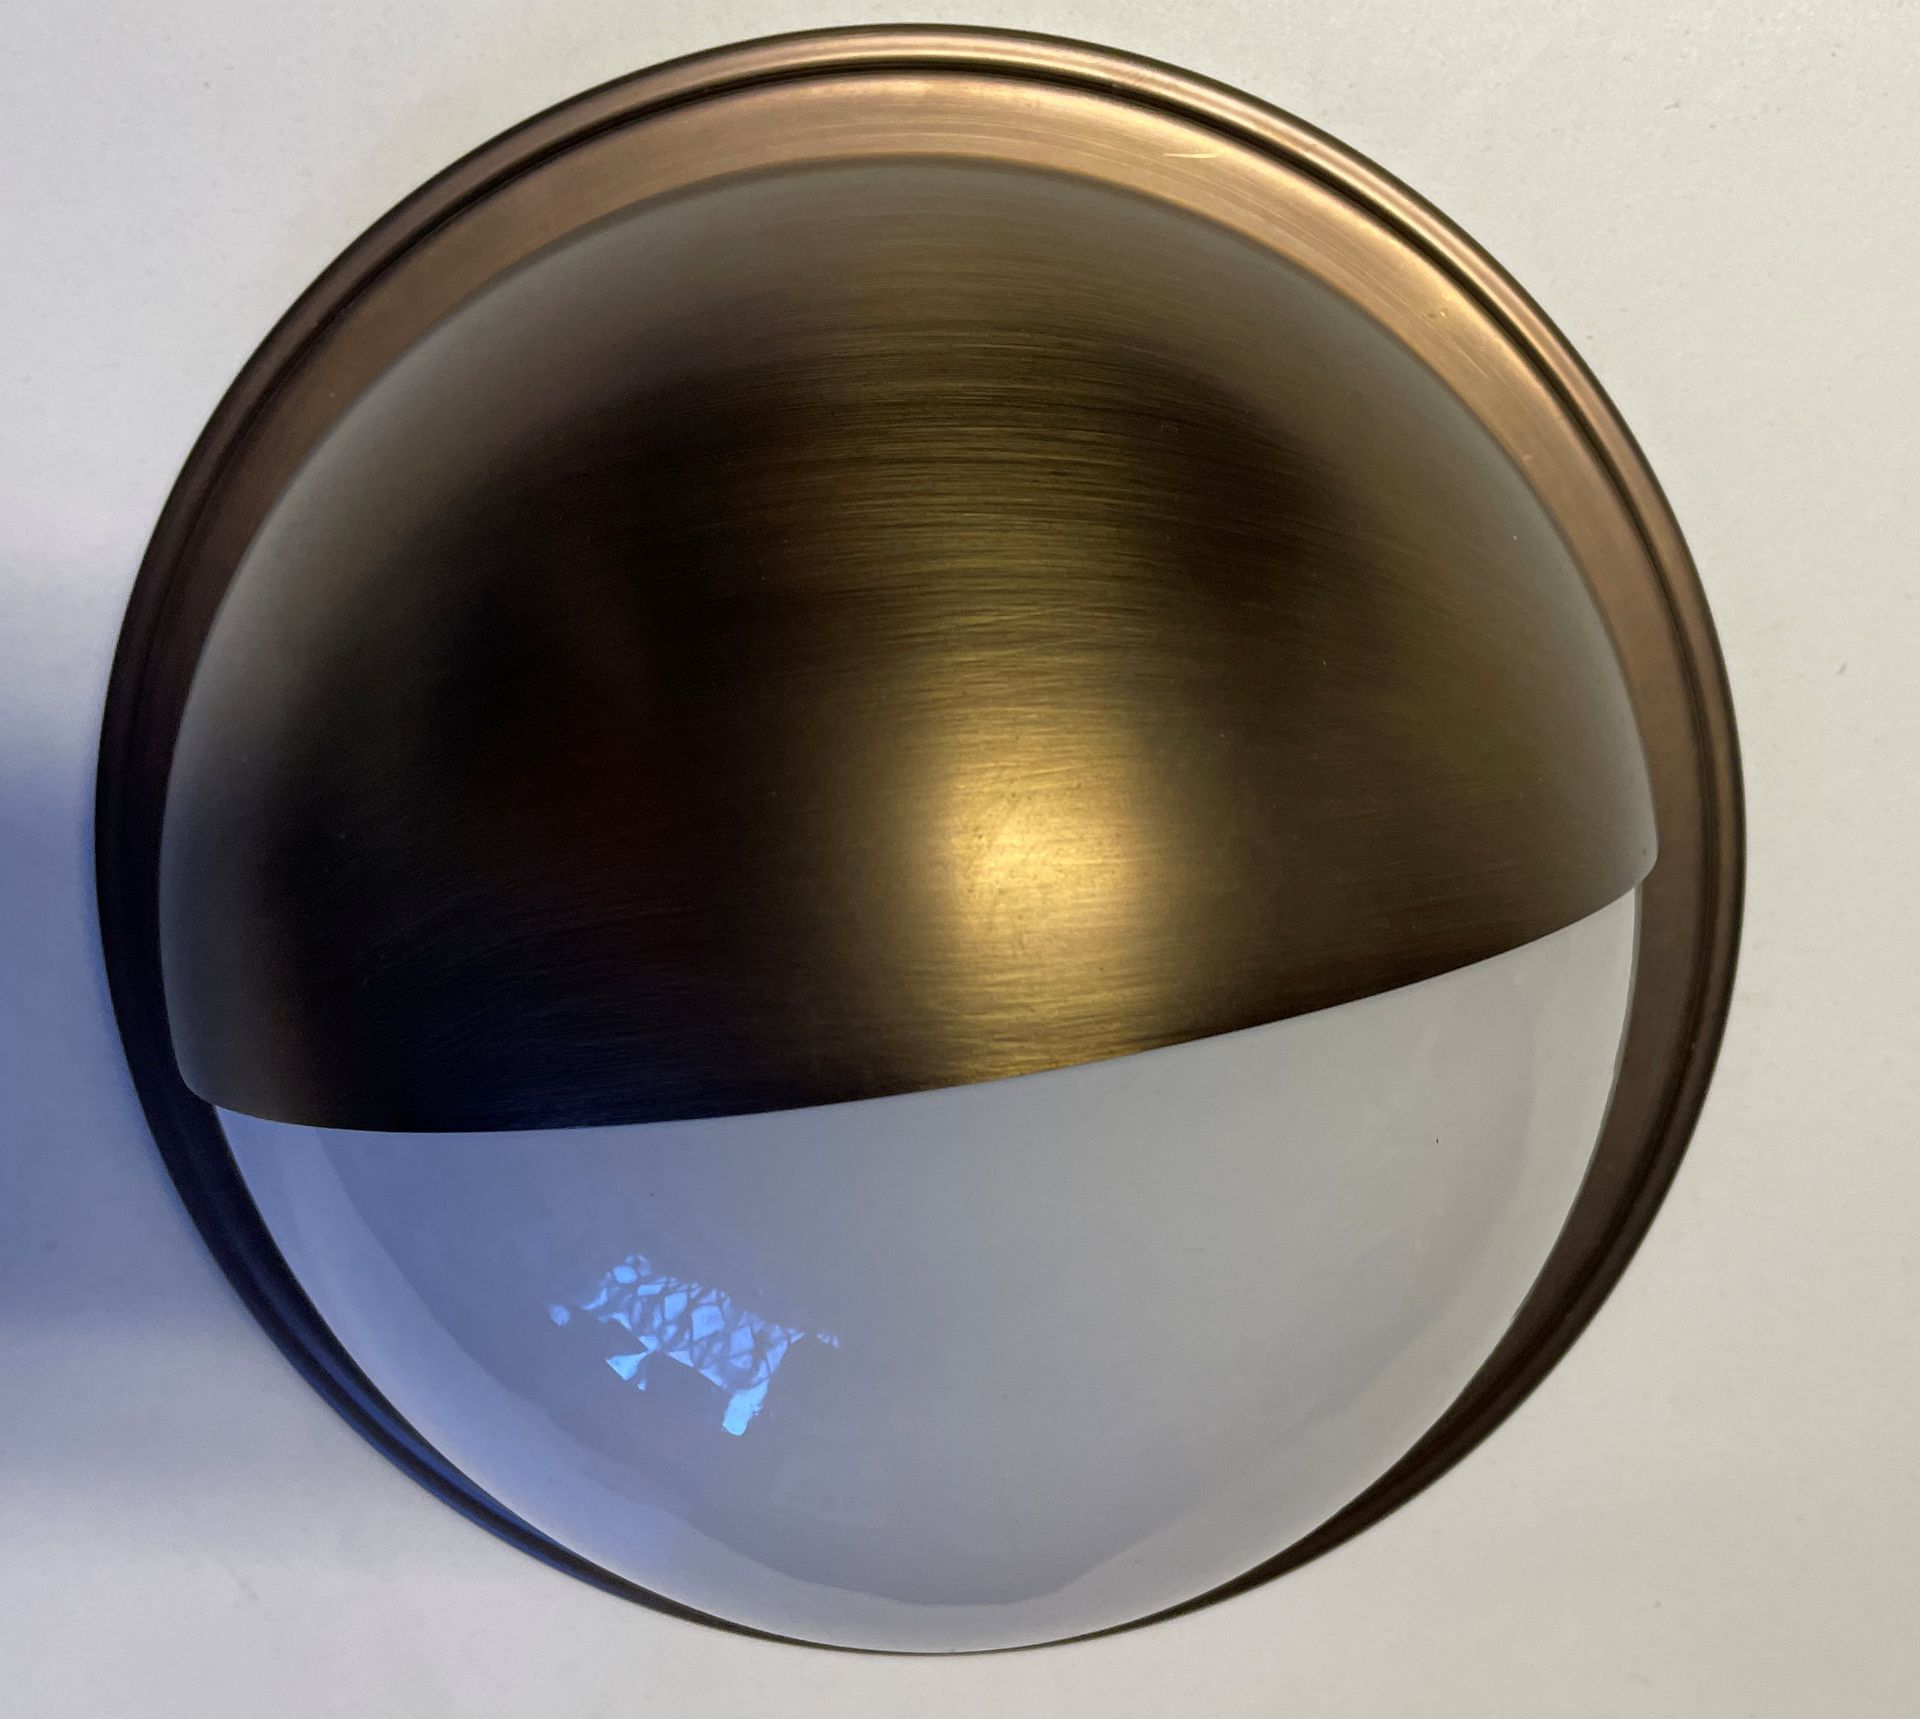 1 x Chelsom Brushed Brass Heavy Maritime style Wall lamp (20cm Diameter X 13cm depth) would look ju